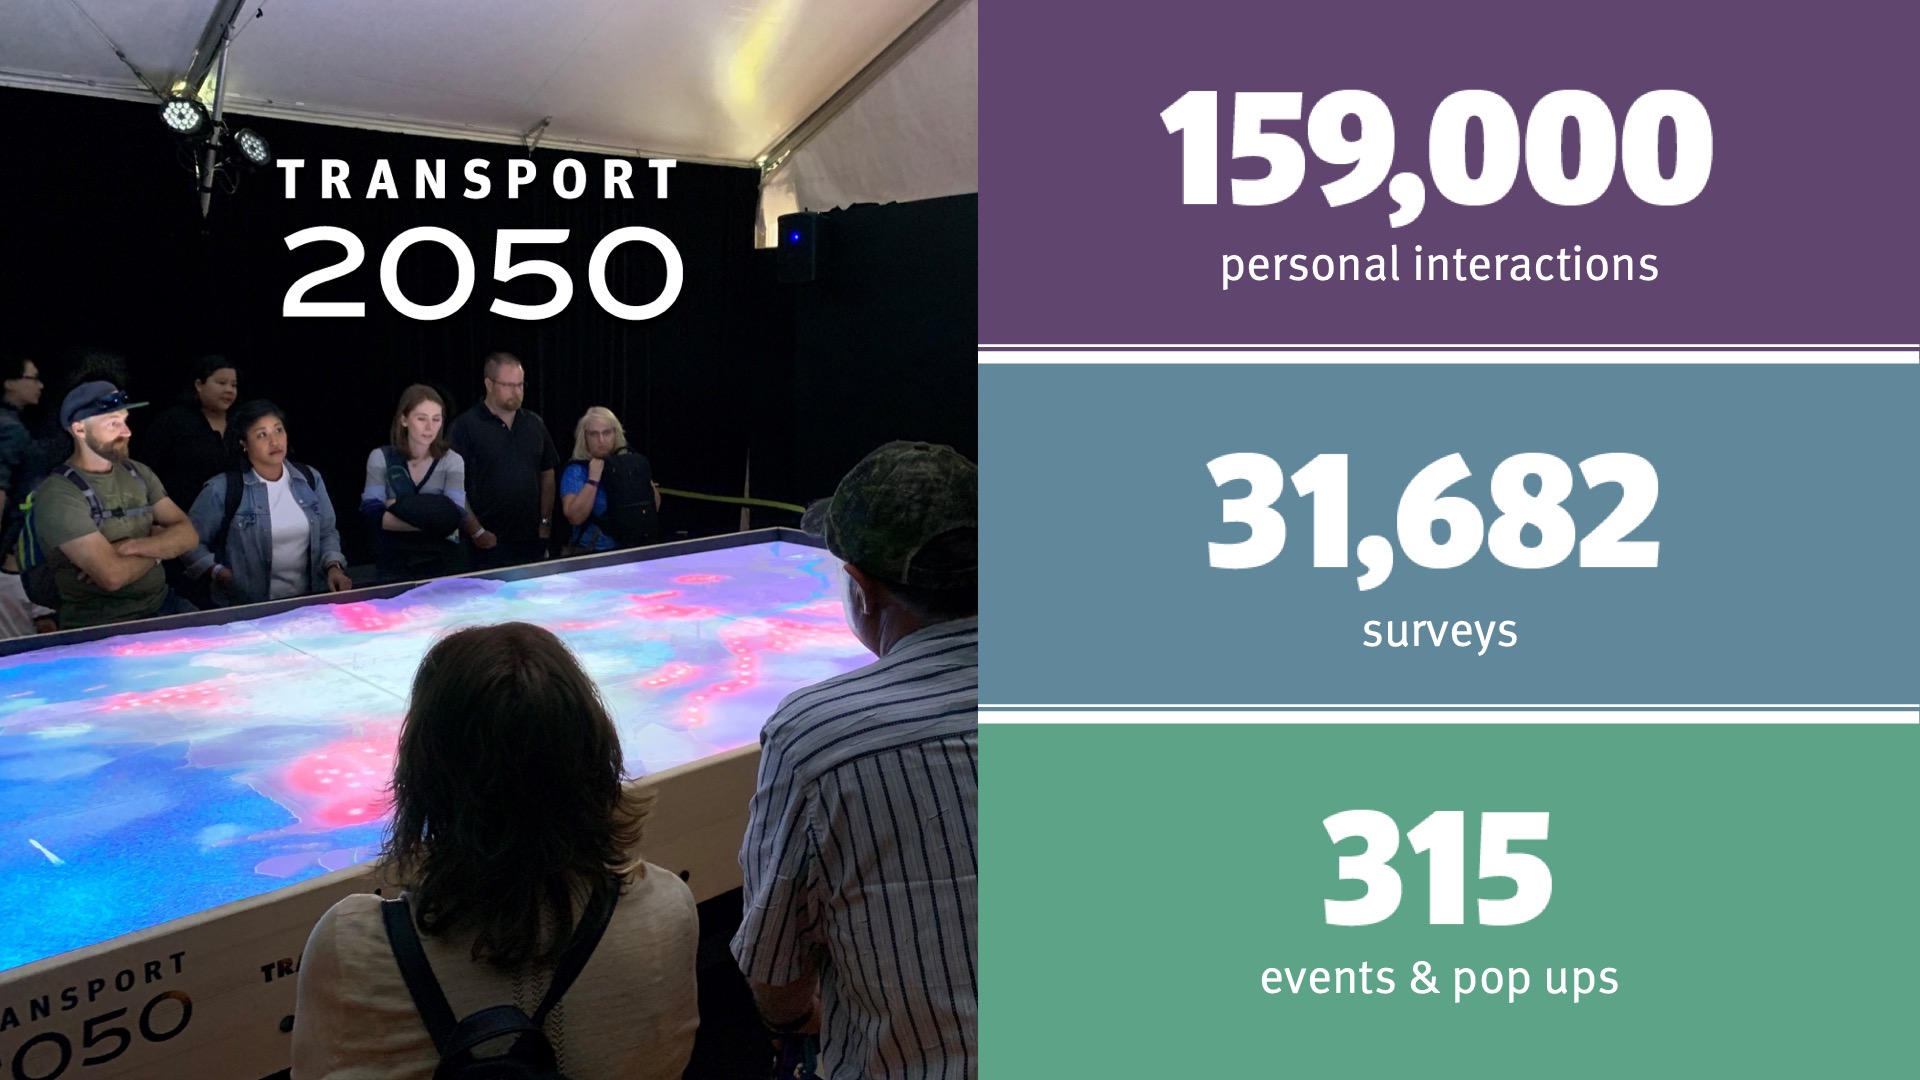 159,000 personal interactions; 31,682 surveys; and 315 events and pop-ups